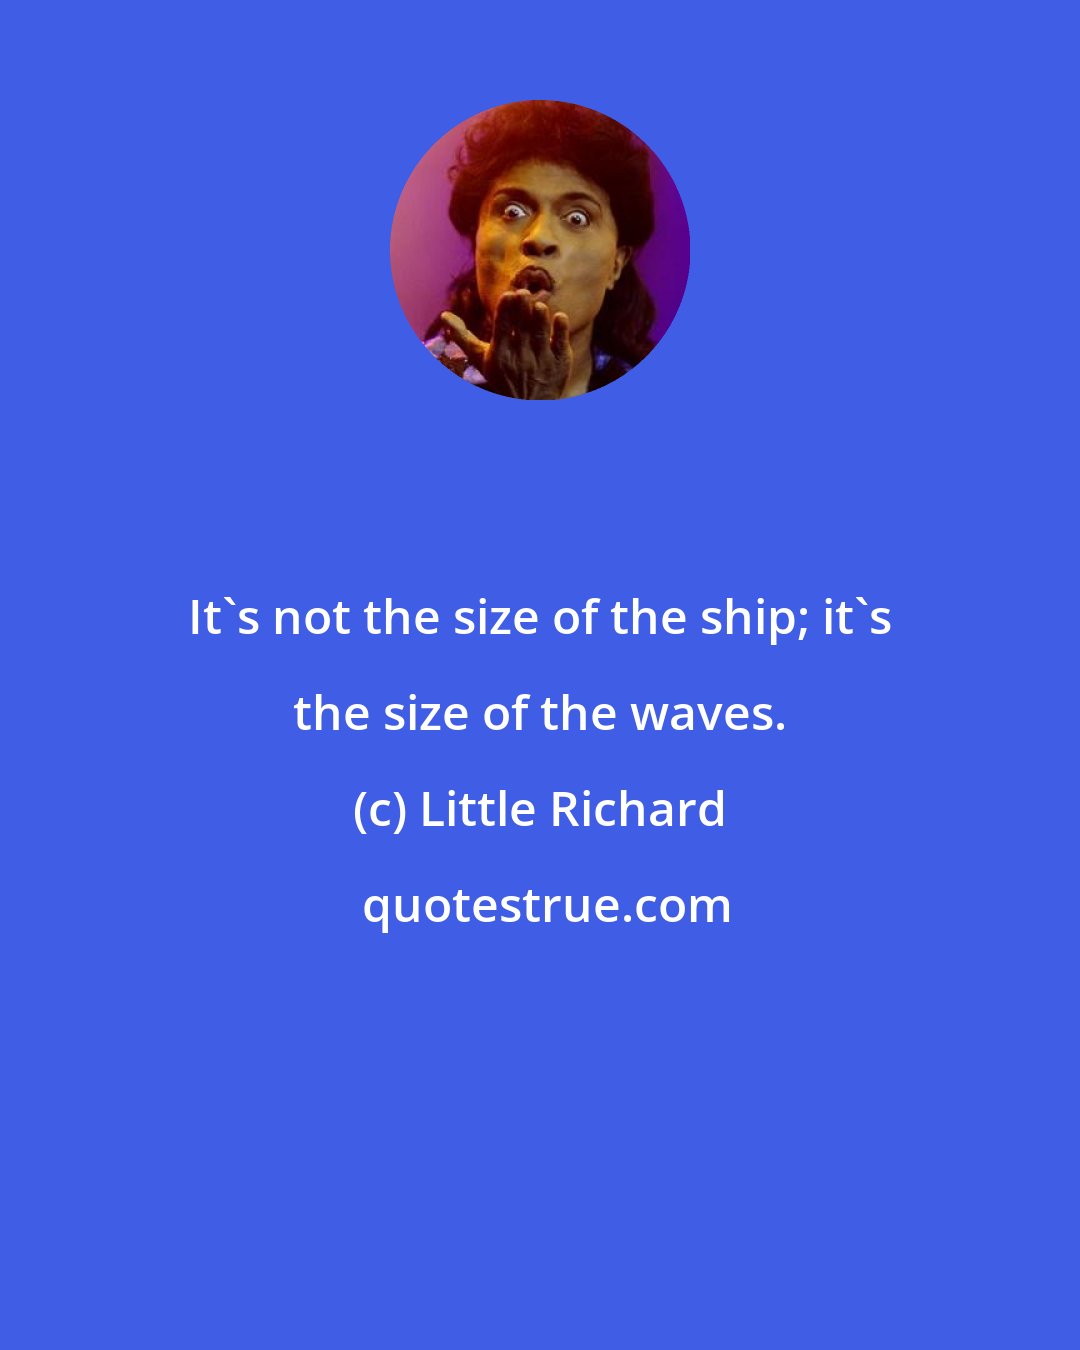 Little Richard: It's not the size of the ship; it's the size of the waves.